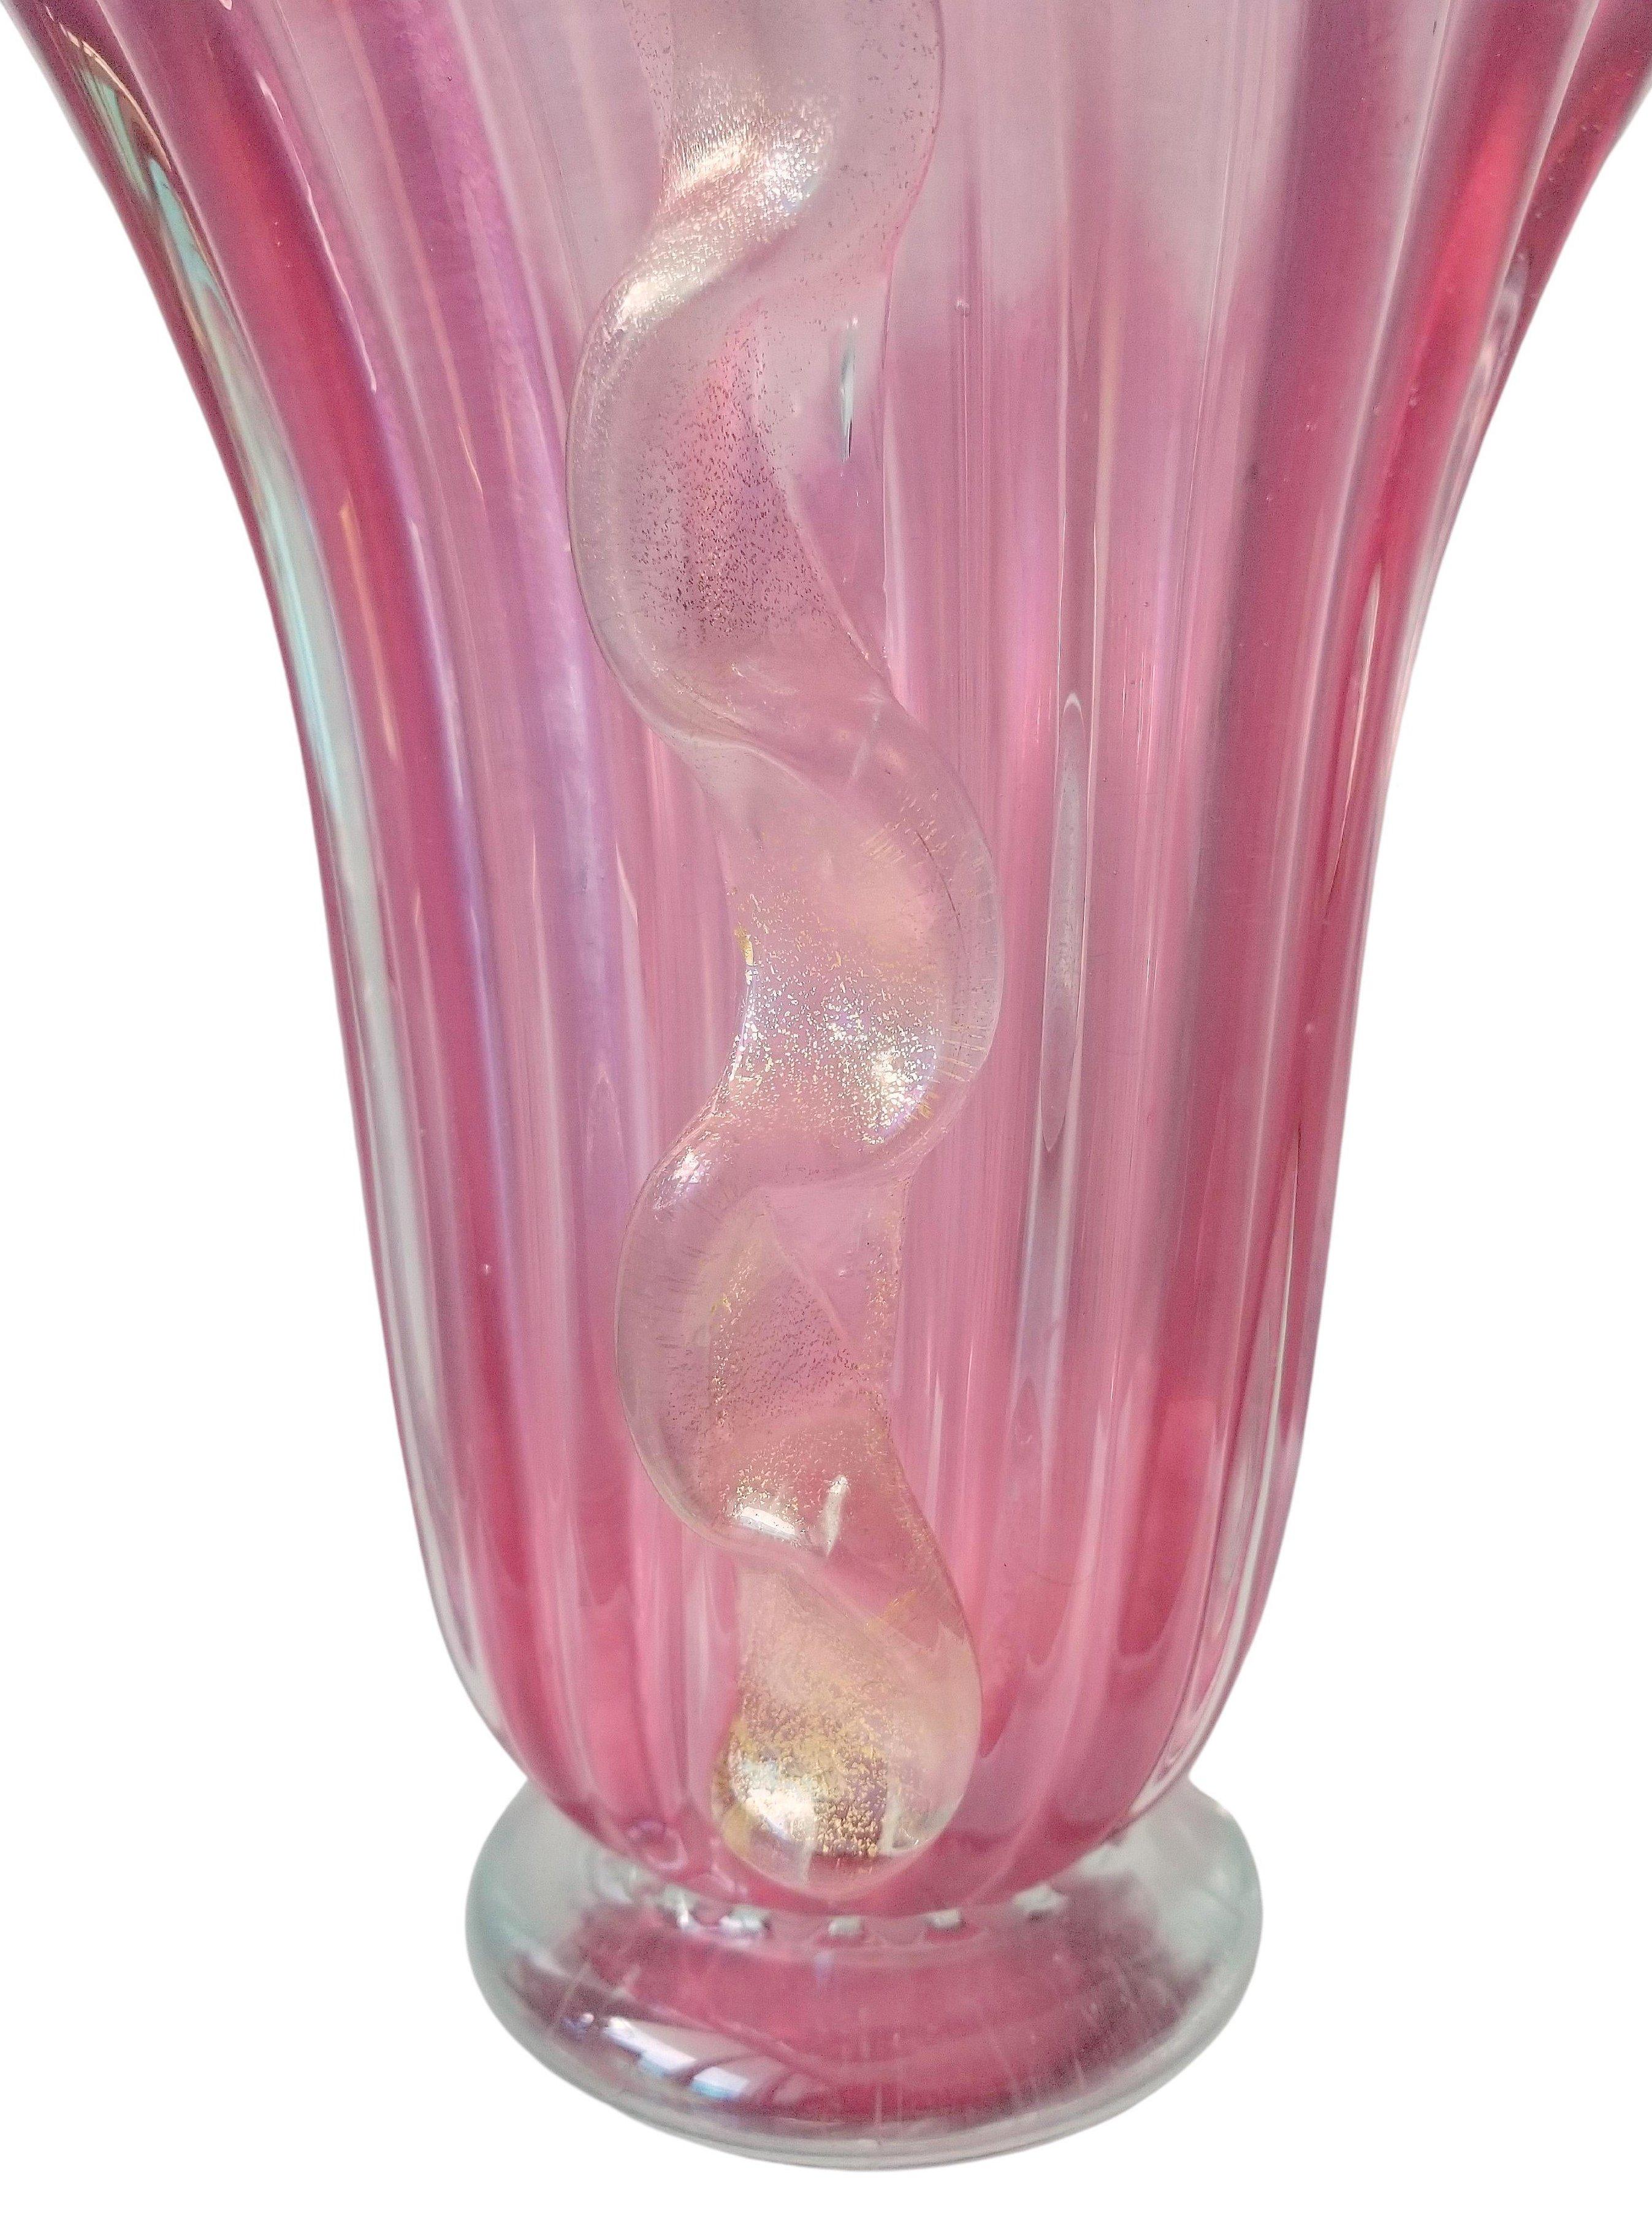 Large transparent pink handmade Murano glass vase. The vintage vessel is enriched by side applications of shaped glass with a characteristic Morise wavy pattern with gold aventurine. The ribbed campana shaped body has an iridescent finish on the